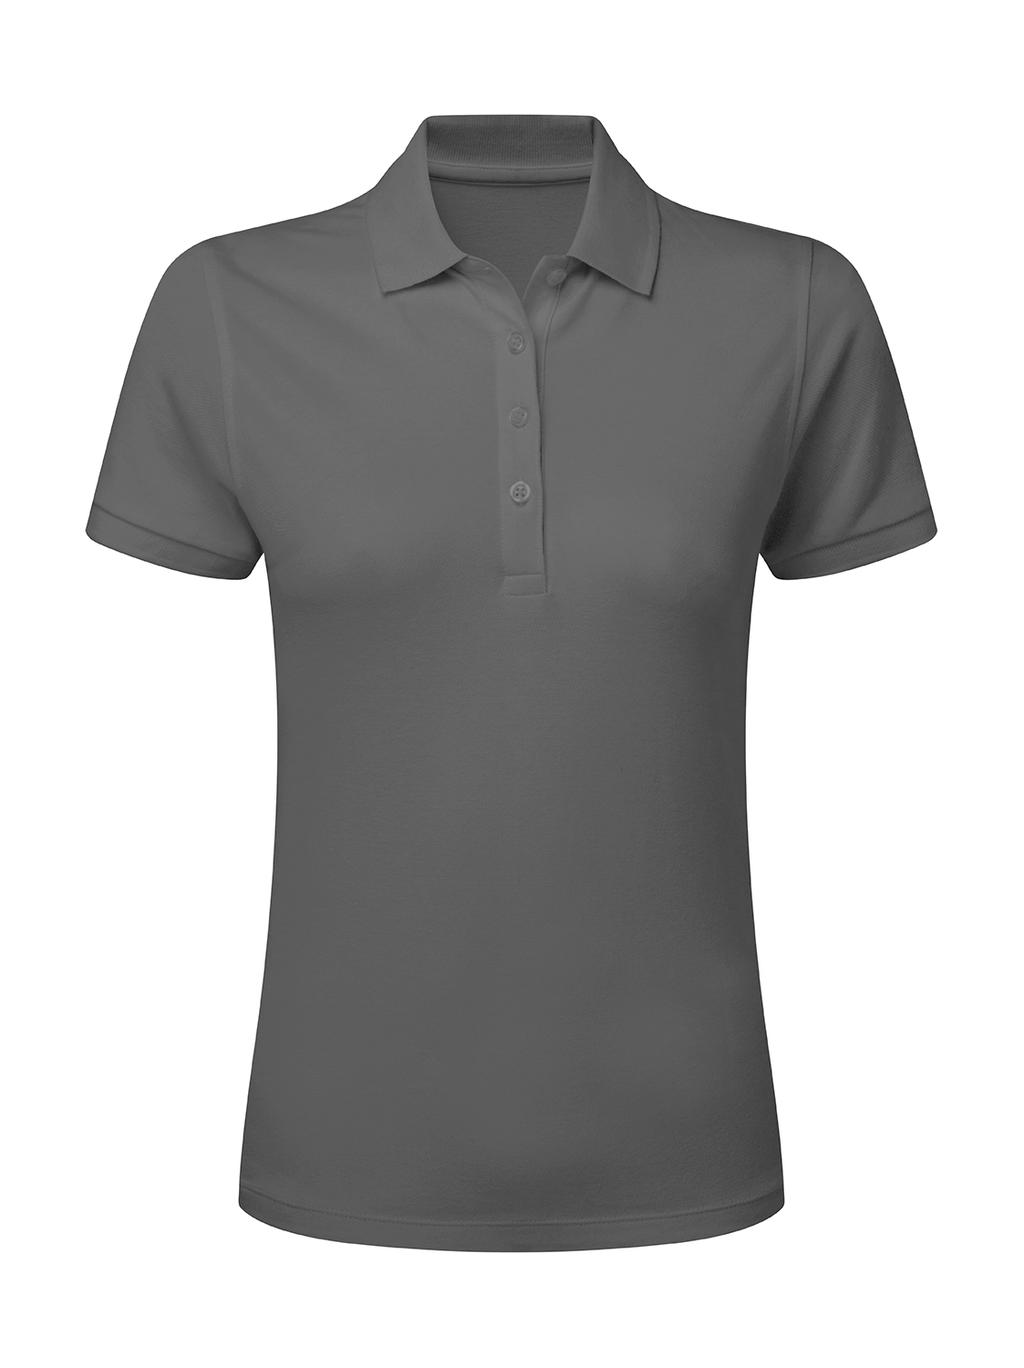  Ladies Signature Stretch Tagless Polo in Farbe Charcoal